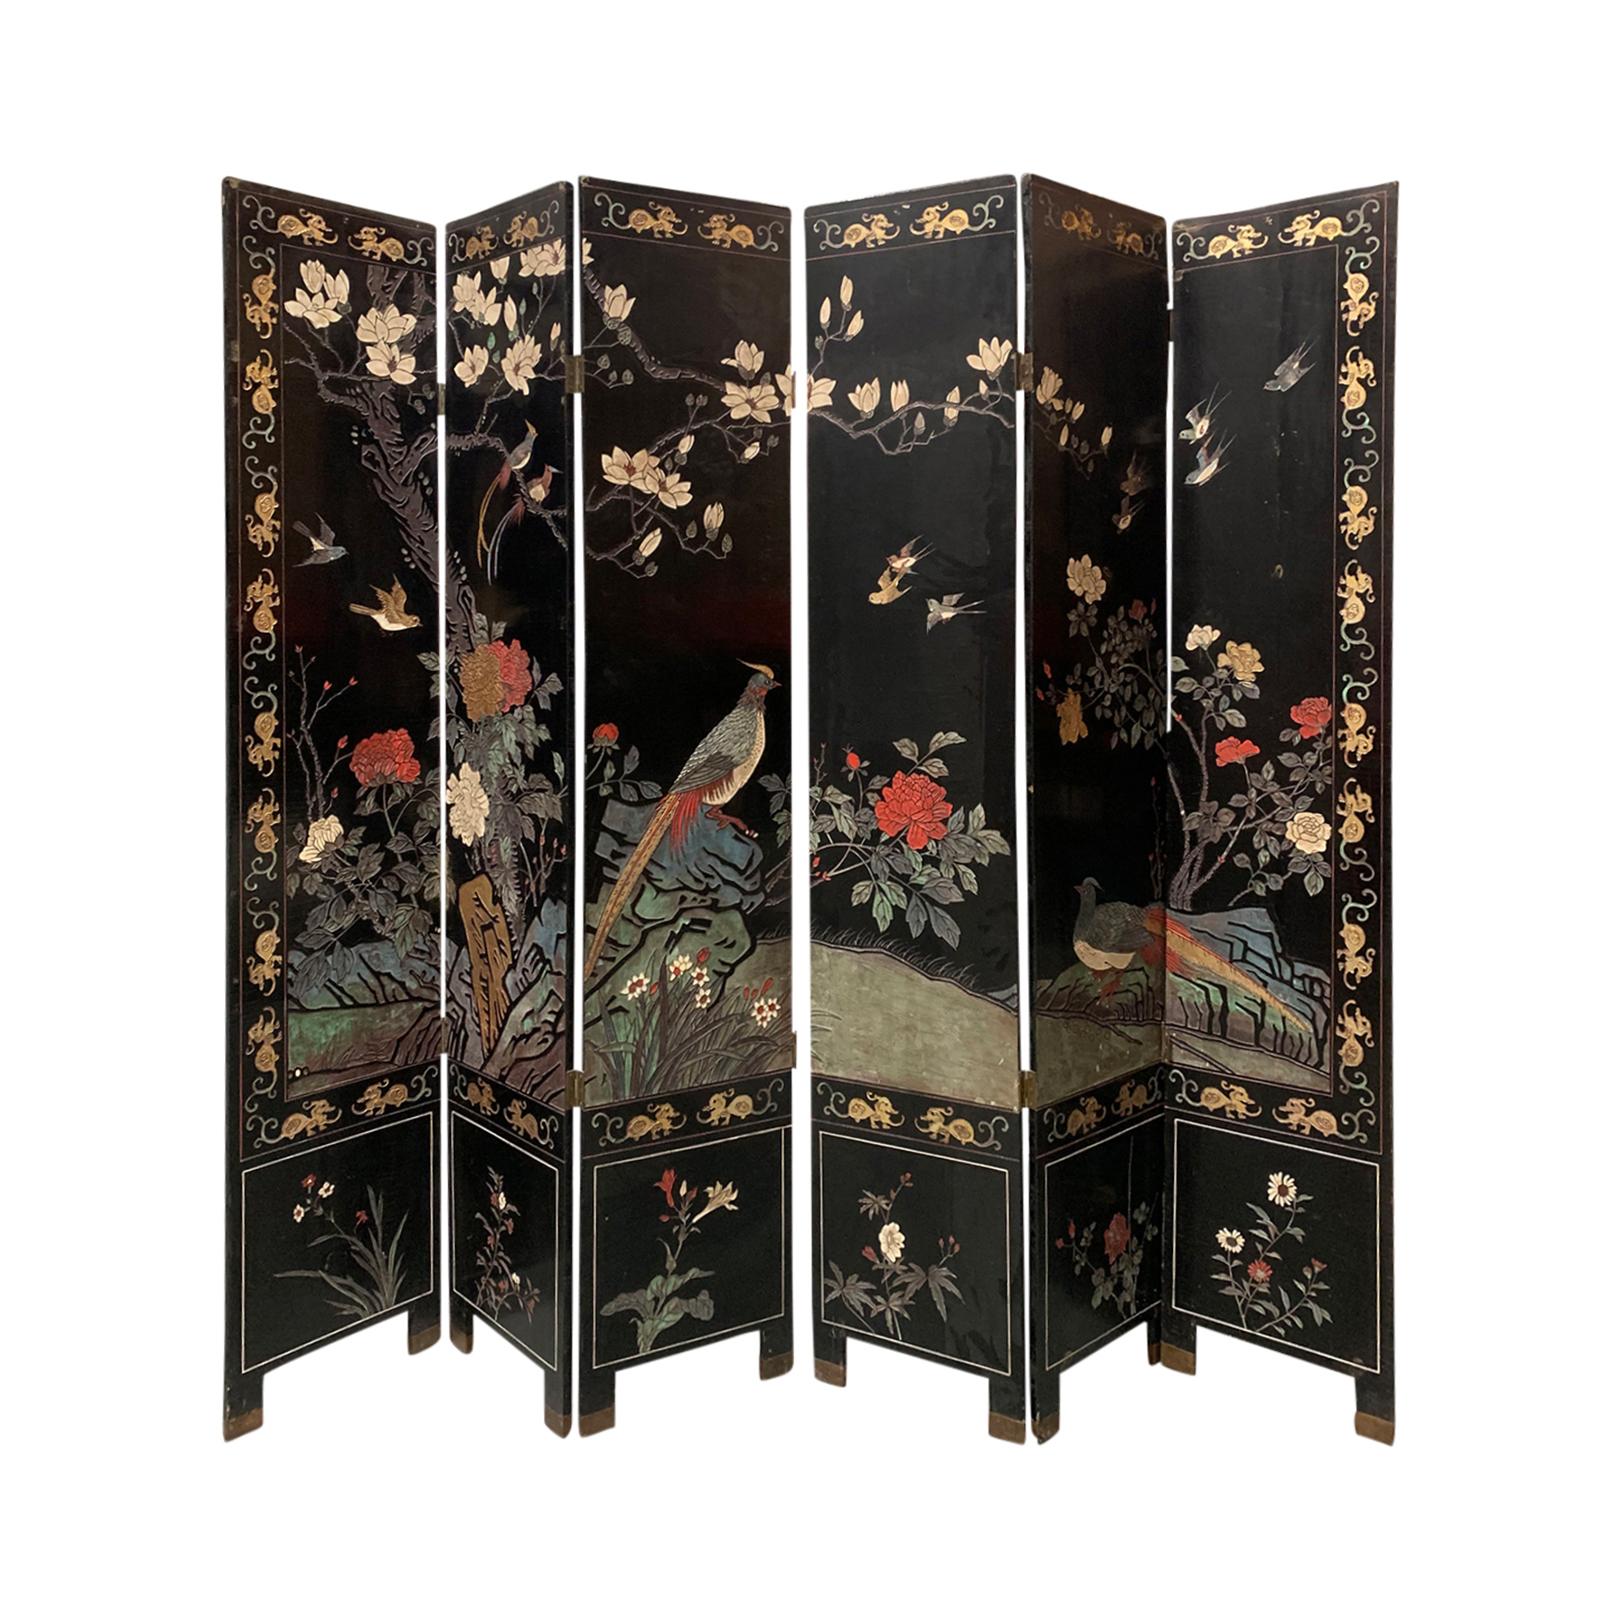 20th century Coromandel chinoiserie six-panel screen
Two pieces, three panels per screen
Primary photo shows both sides (front and back).